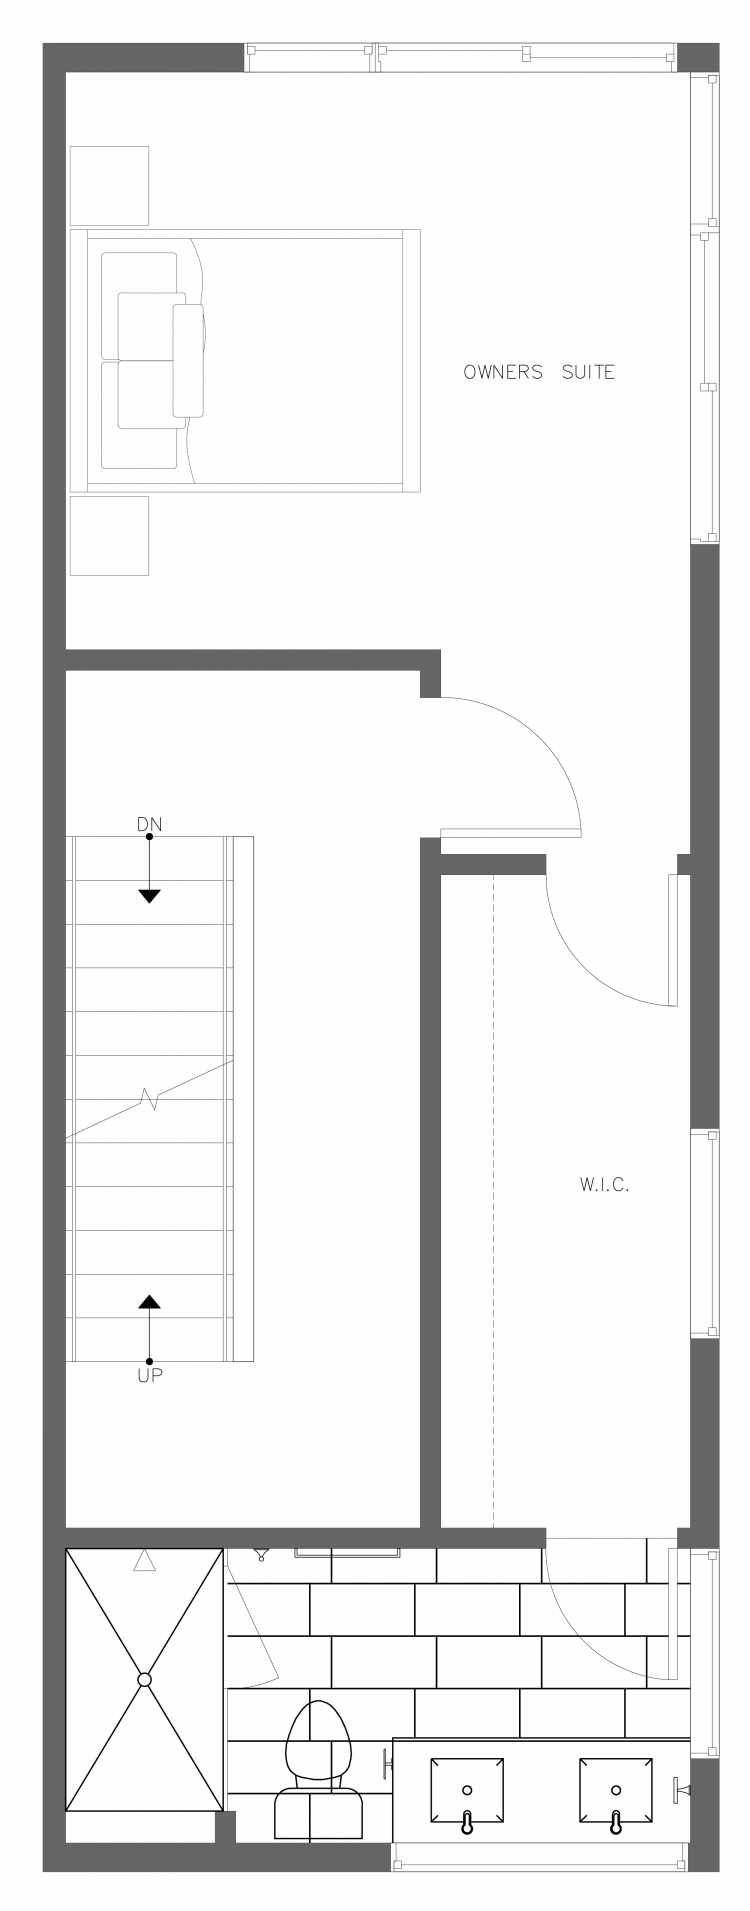 Third Floor Plan of 3418C 15th Ave W, One of the Arlo Townhomes in North Queen Anne